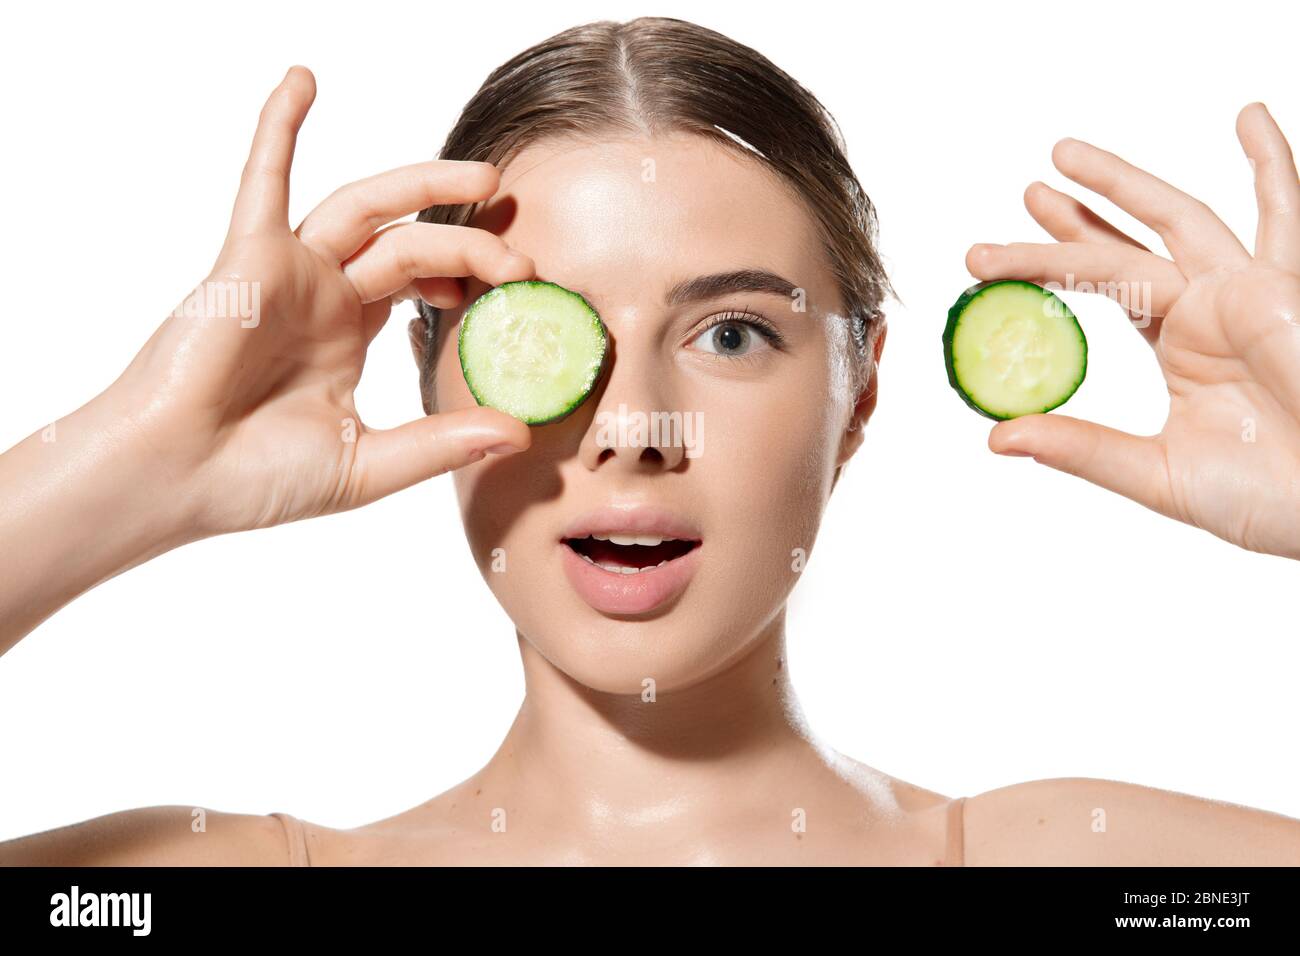 Portrait of beautiful young woman with fresh cucumber on face over white background. Concept of cosmetics, makeup, natural and eco treatment, skin care. Shiny and healthy skin, fashion, healthcare. Stock Photo